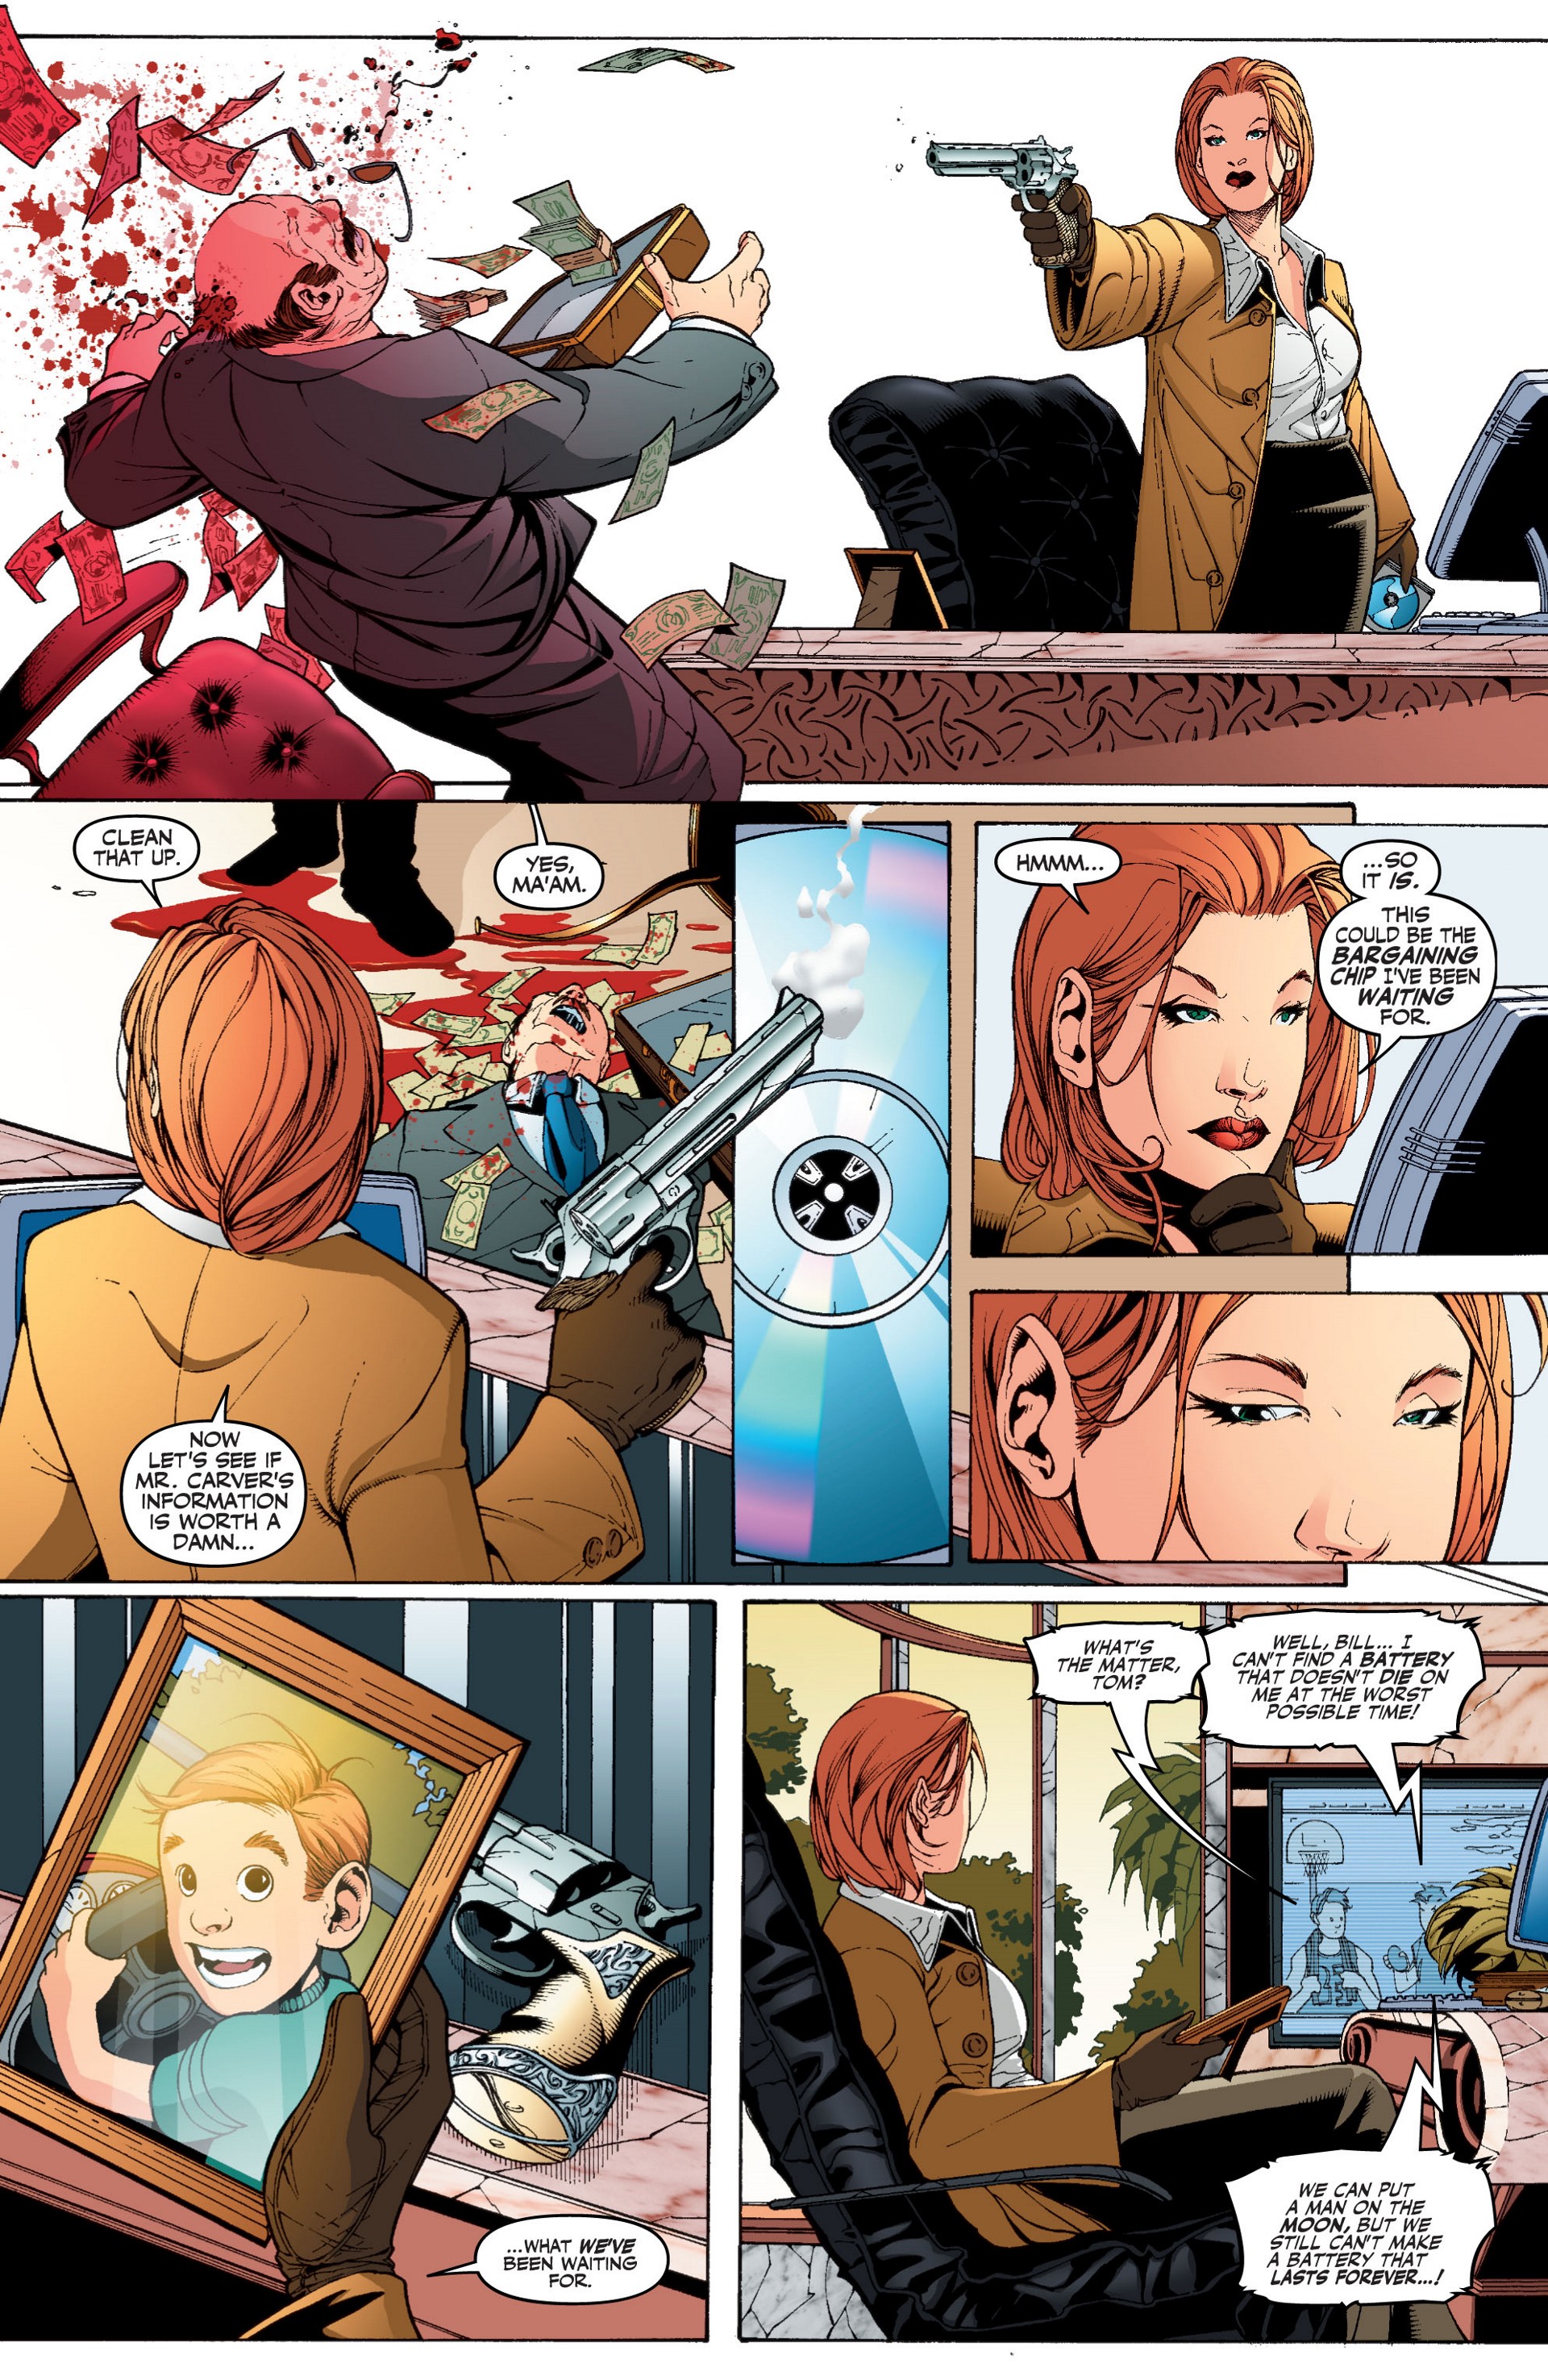 Wildcats Version 3.0 Issue #1 #1 - English 31